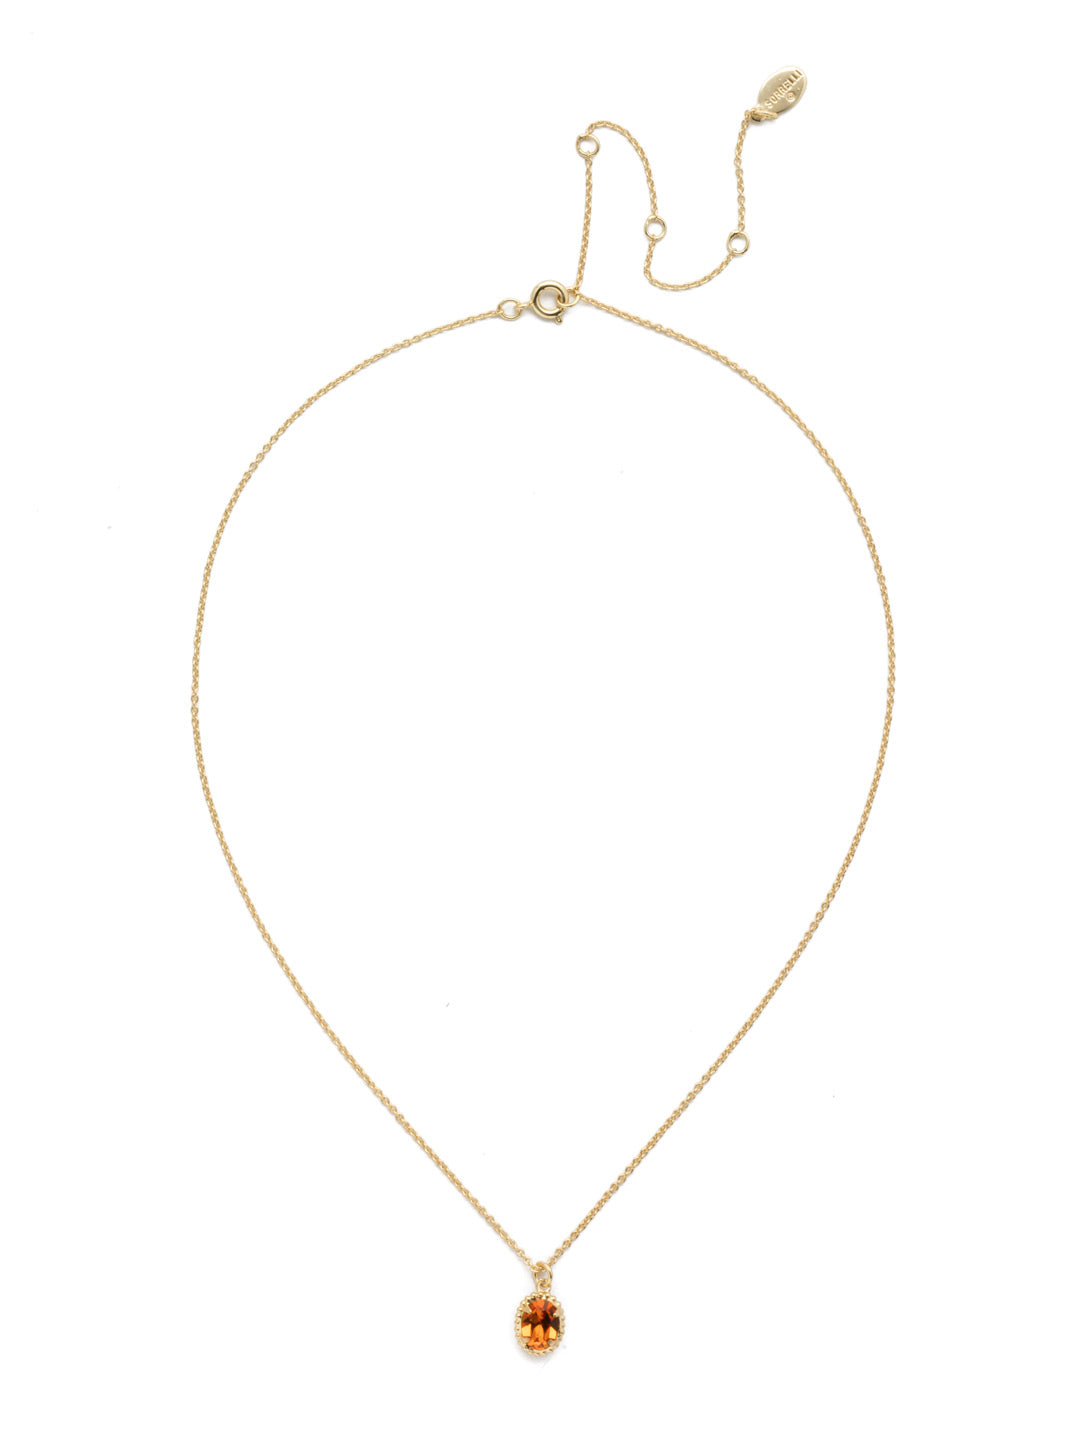 Maisie Pendant Necklace - NEF49BGT - This is the perfect day-to-night sparkling tiny pendant necklace that has an adjustable chain to fit your neckline. From Sorrelli's Tourmaline collection in our Bright Gold-tone finish.